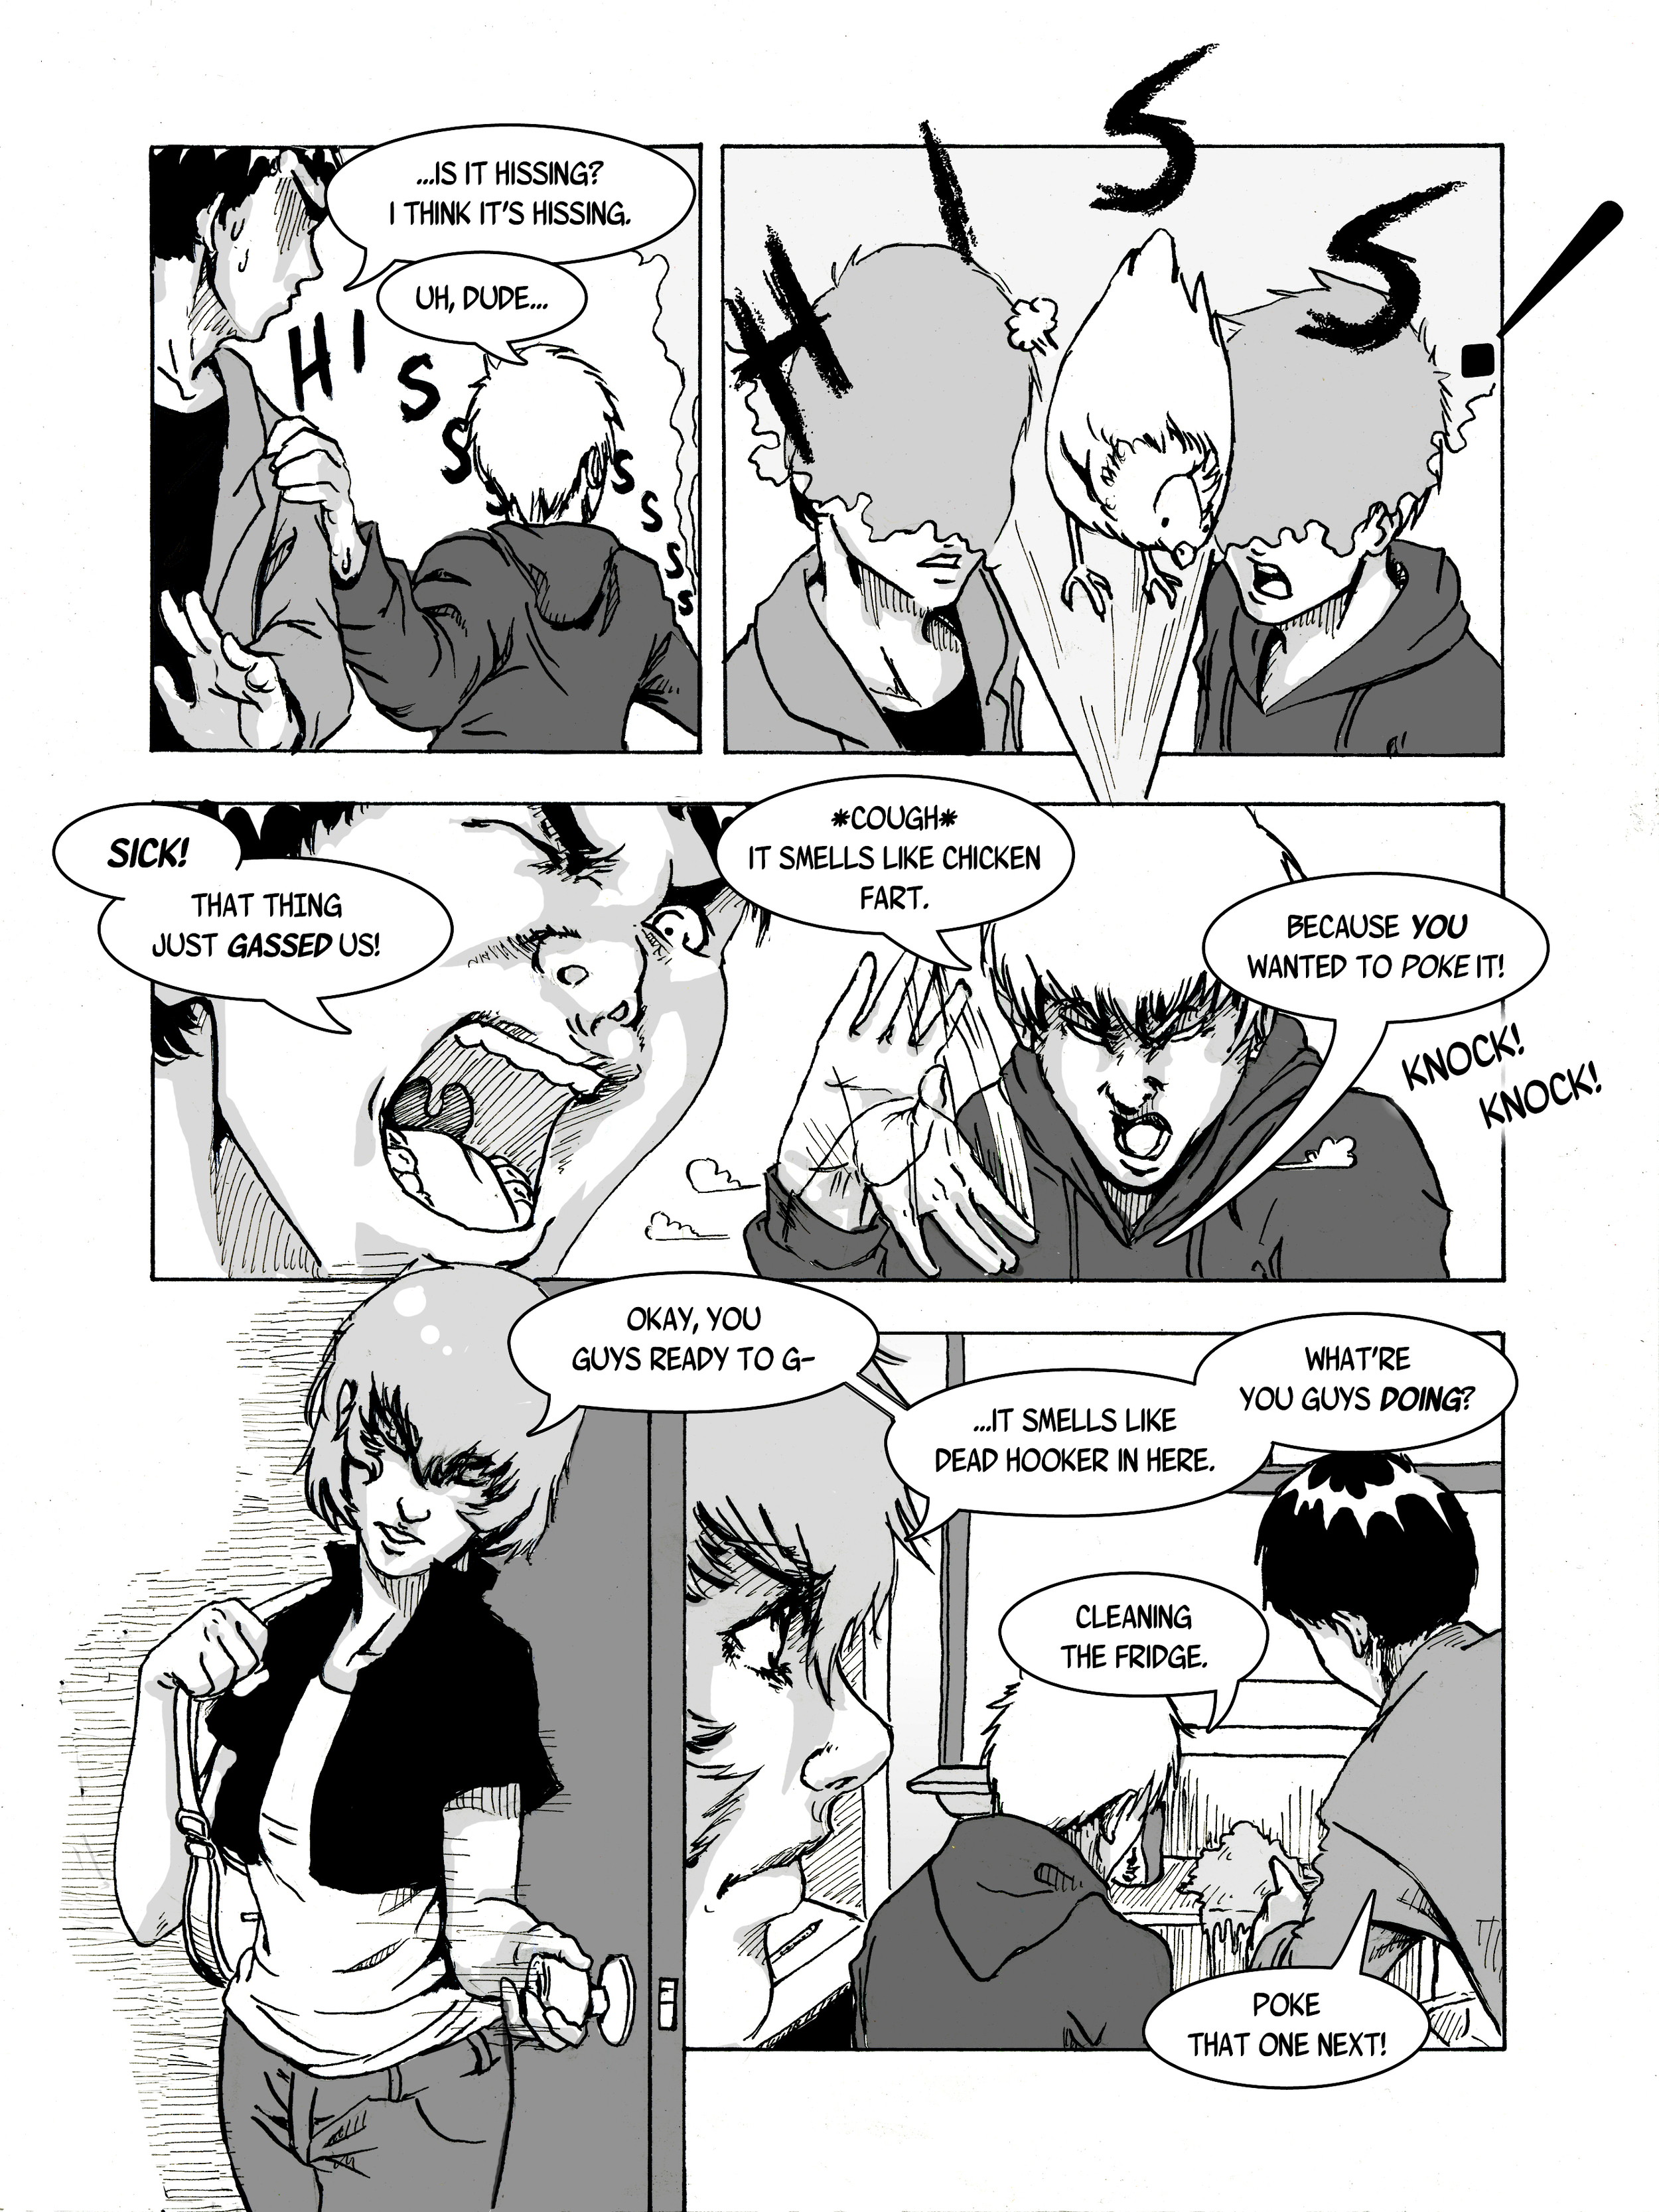 feel smell sound comic page 2 shrunk.jpg